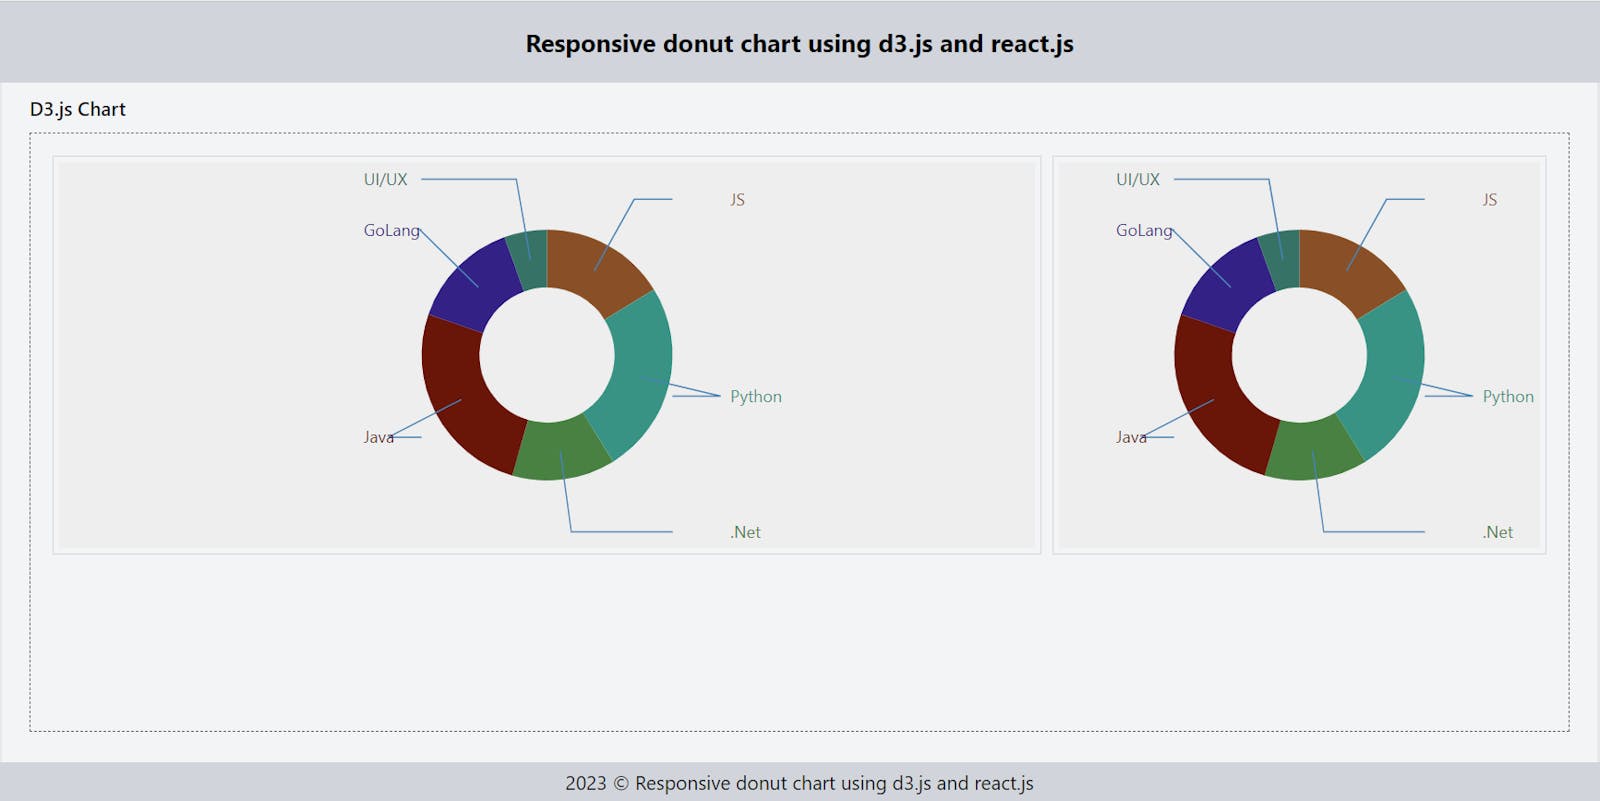 Creating a responsive donut chart using d3.js in React.js